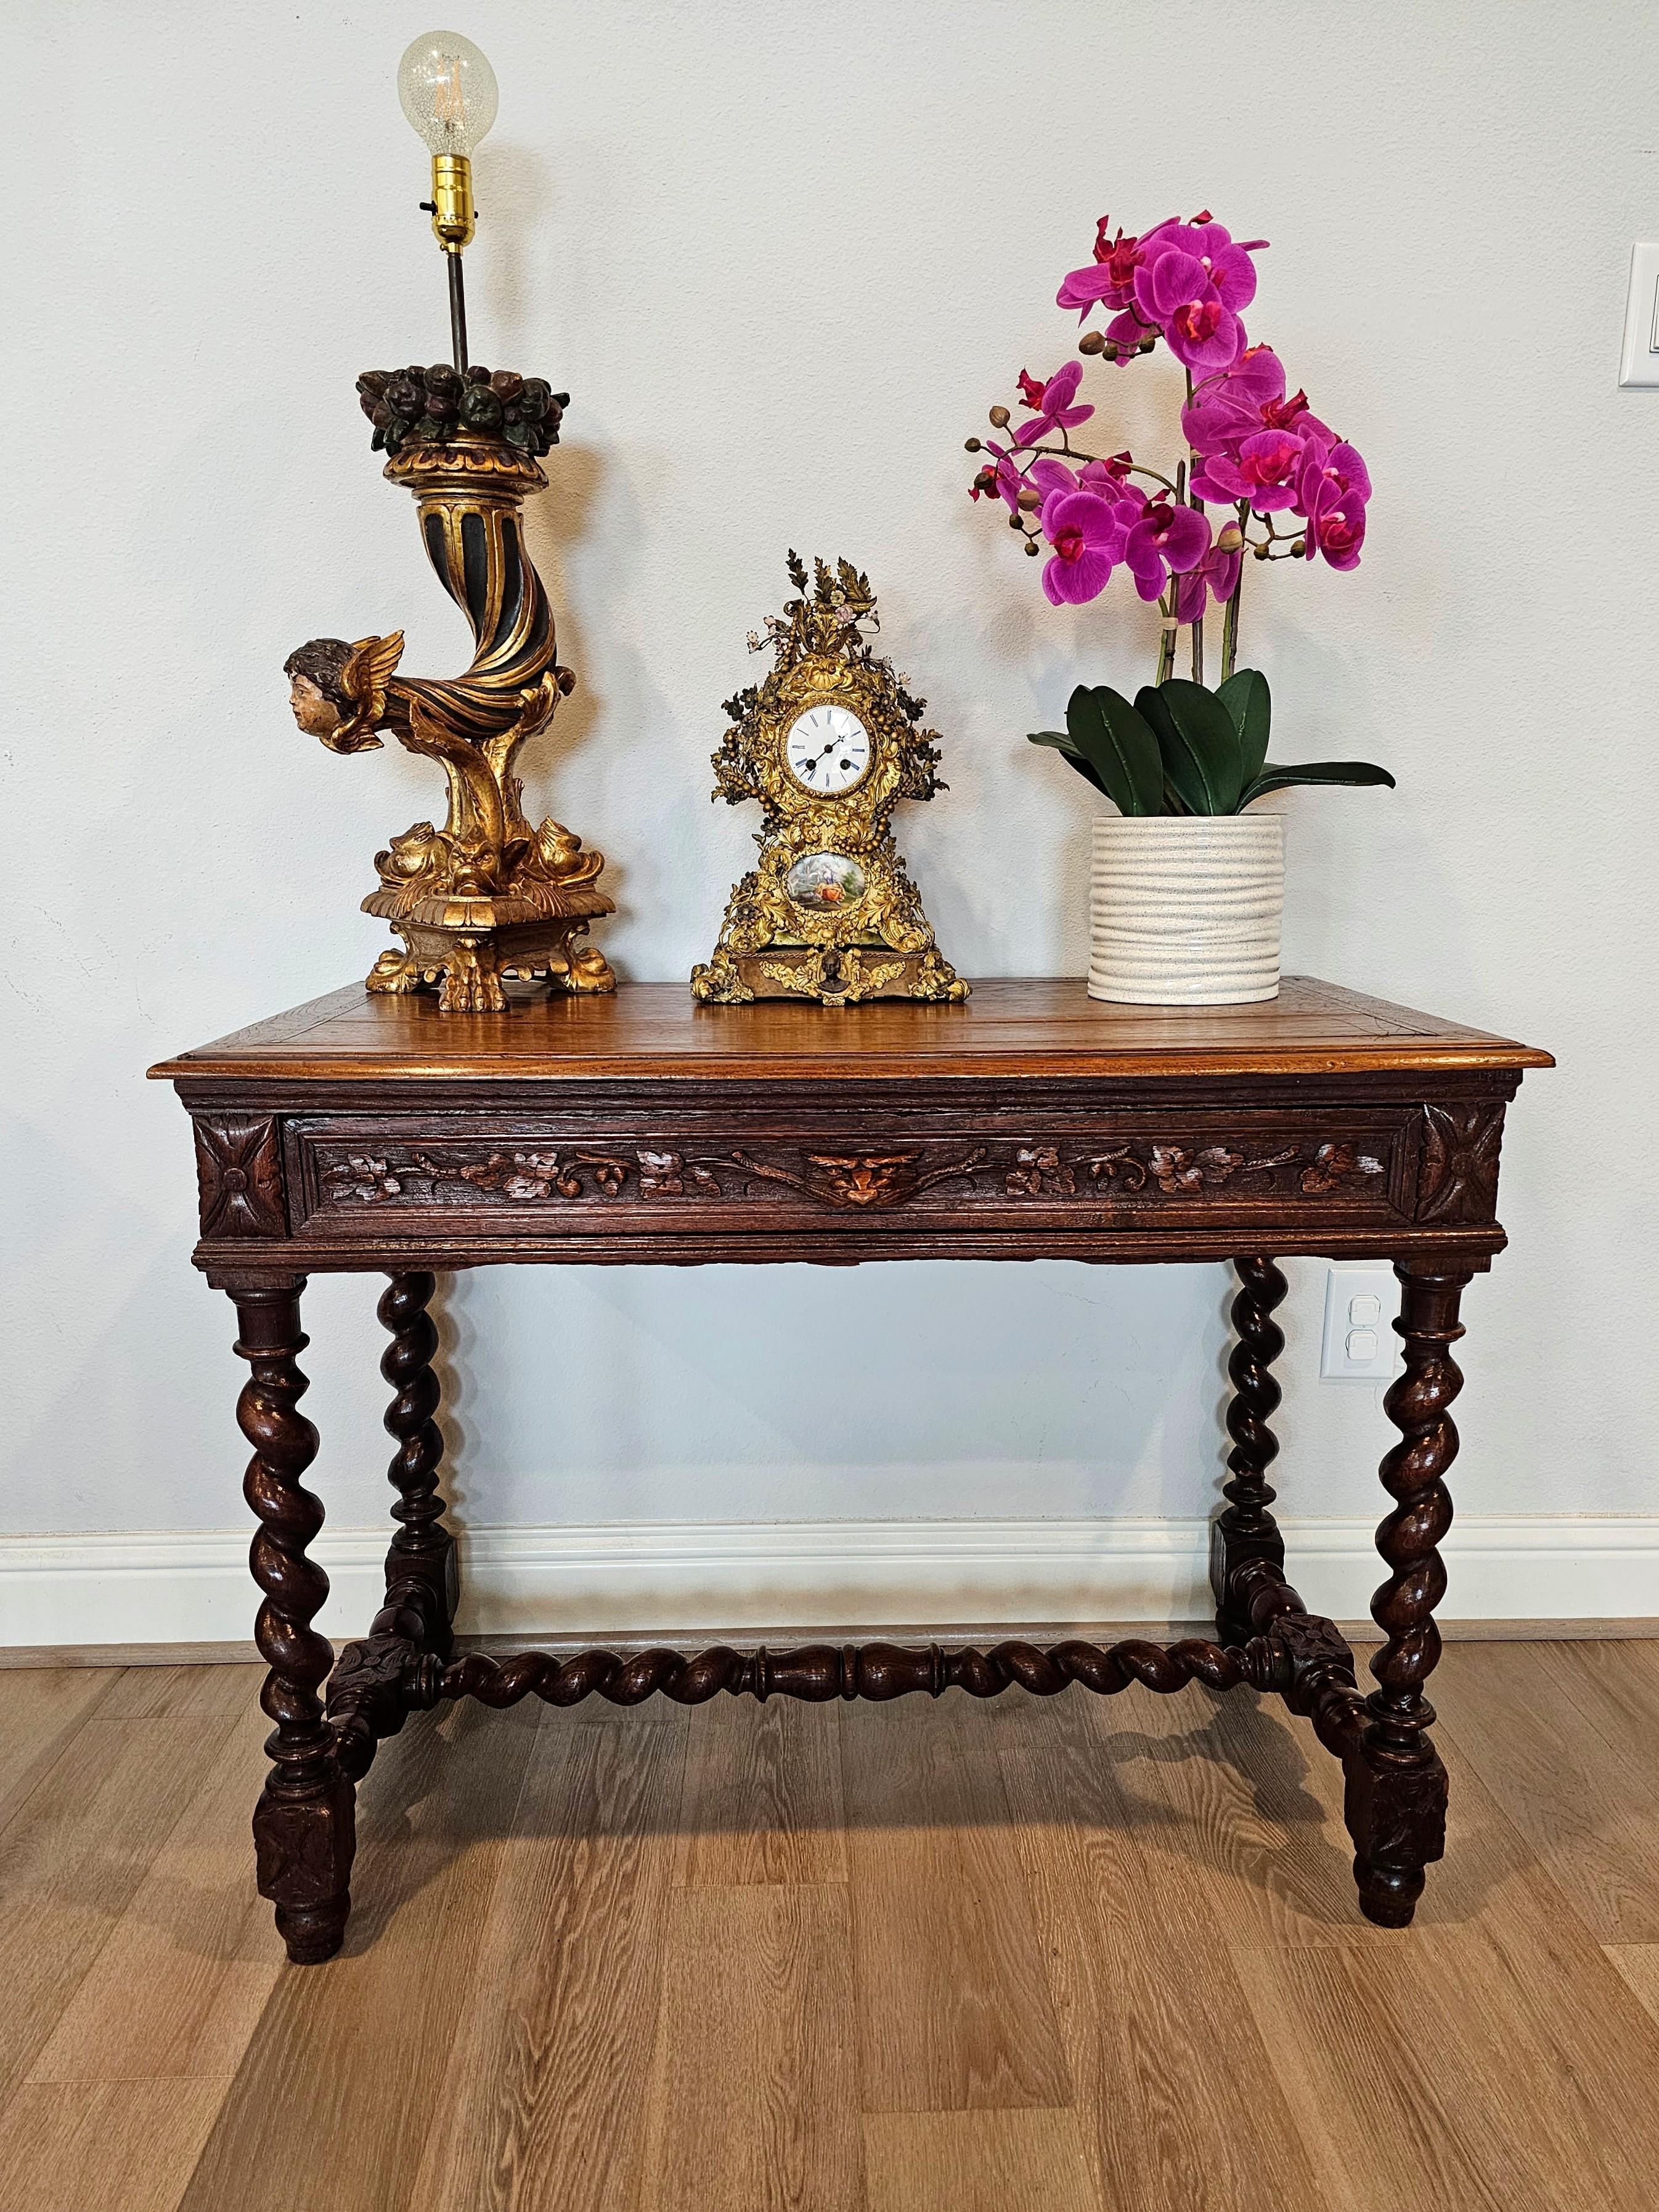 Early 19th Century French Carved Giltwood Figural Winged Putti Table Lamp For Sale 11